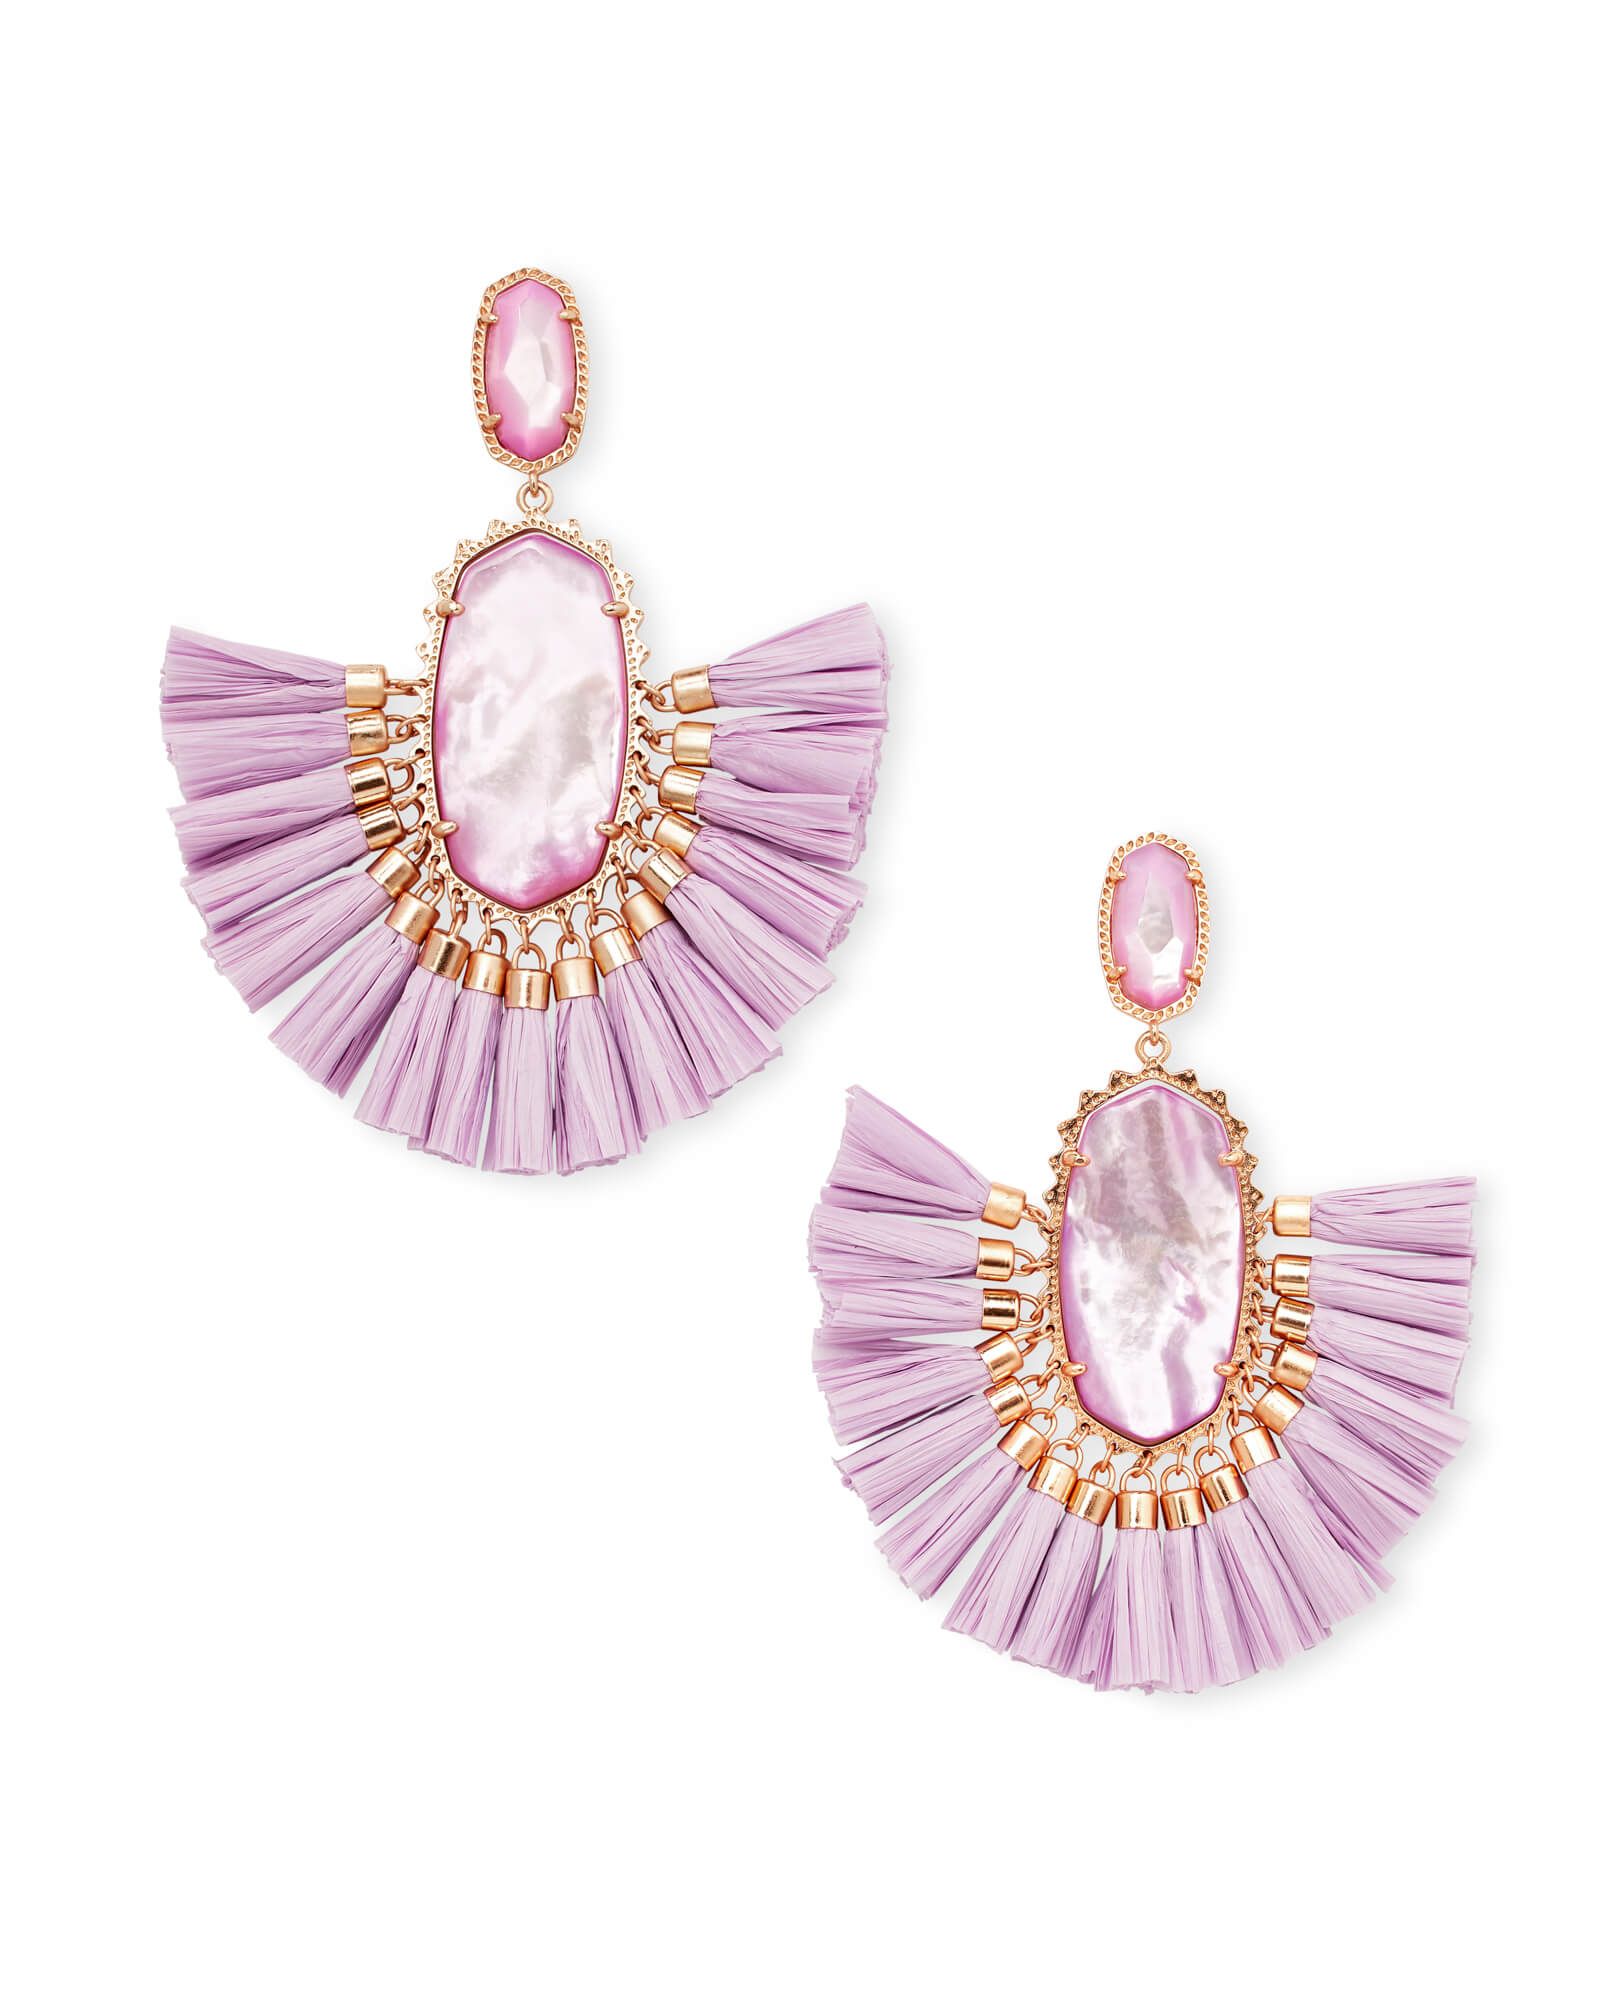 Cristina Rose Gold Statement Earrings In Lilac Mother of Pearl | Kendra Scott